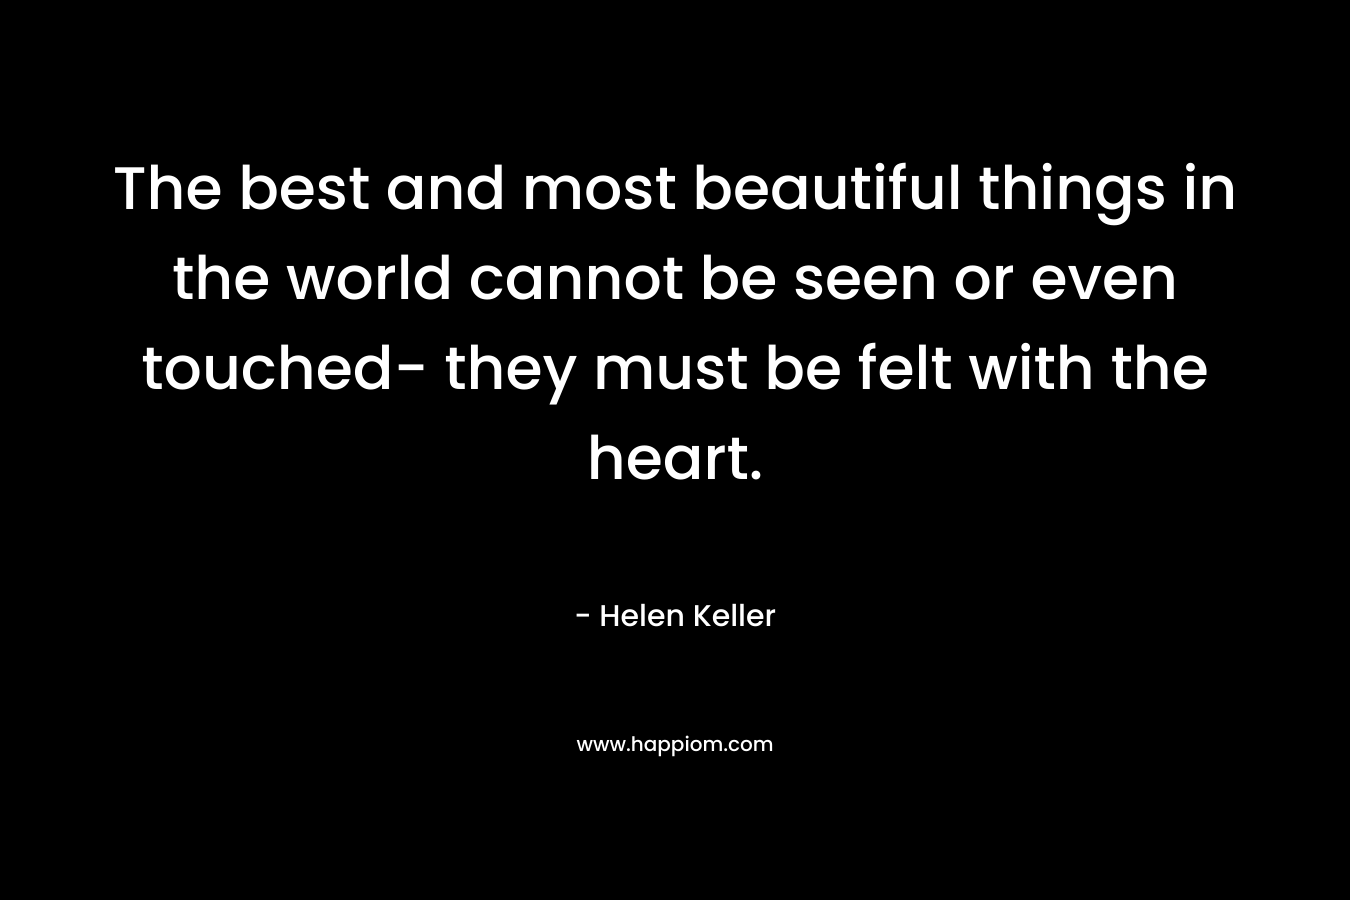 The best and most beautiful things in the world cannot be seen or even touched- they must be felt with the heart.